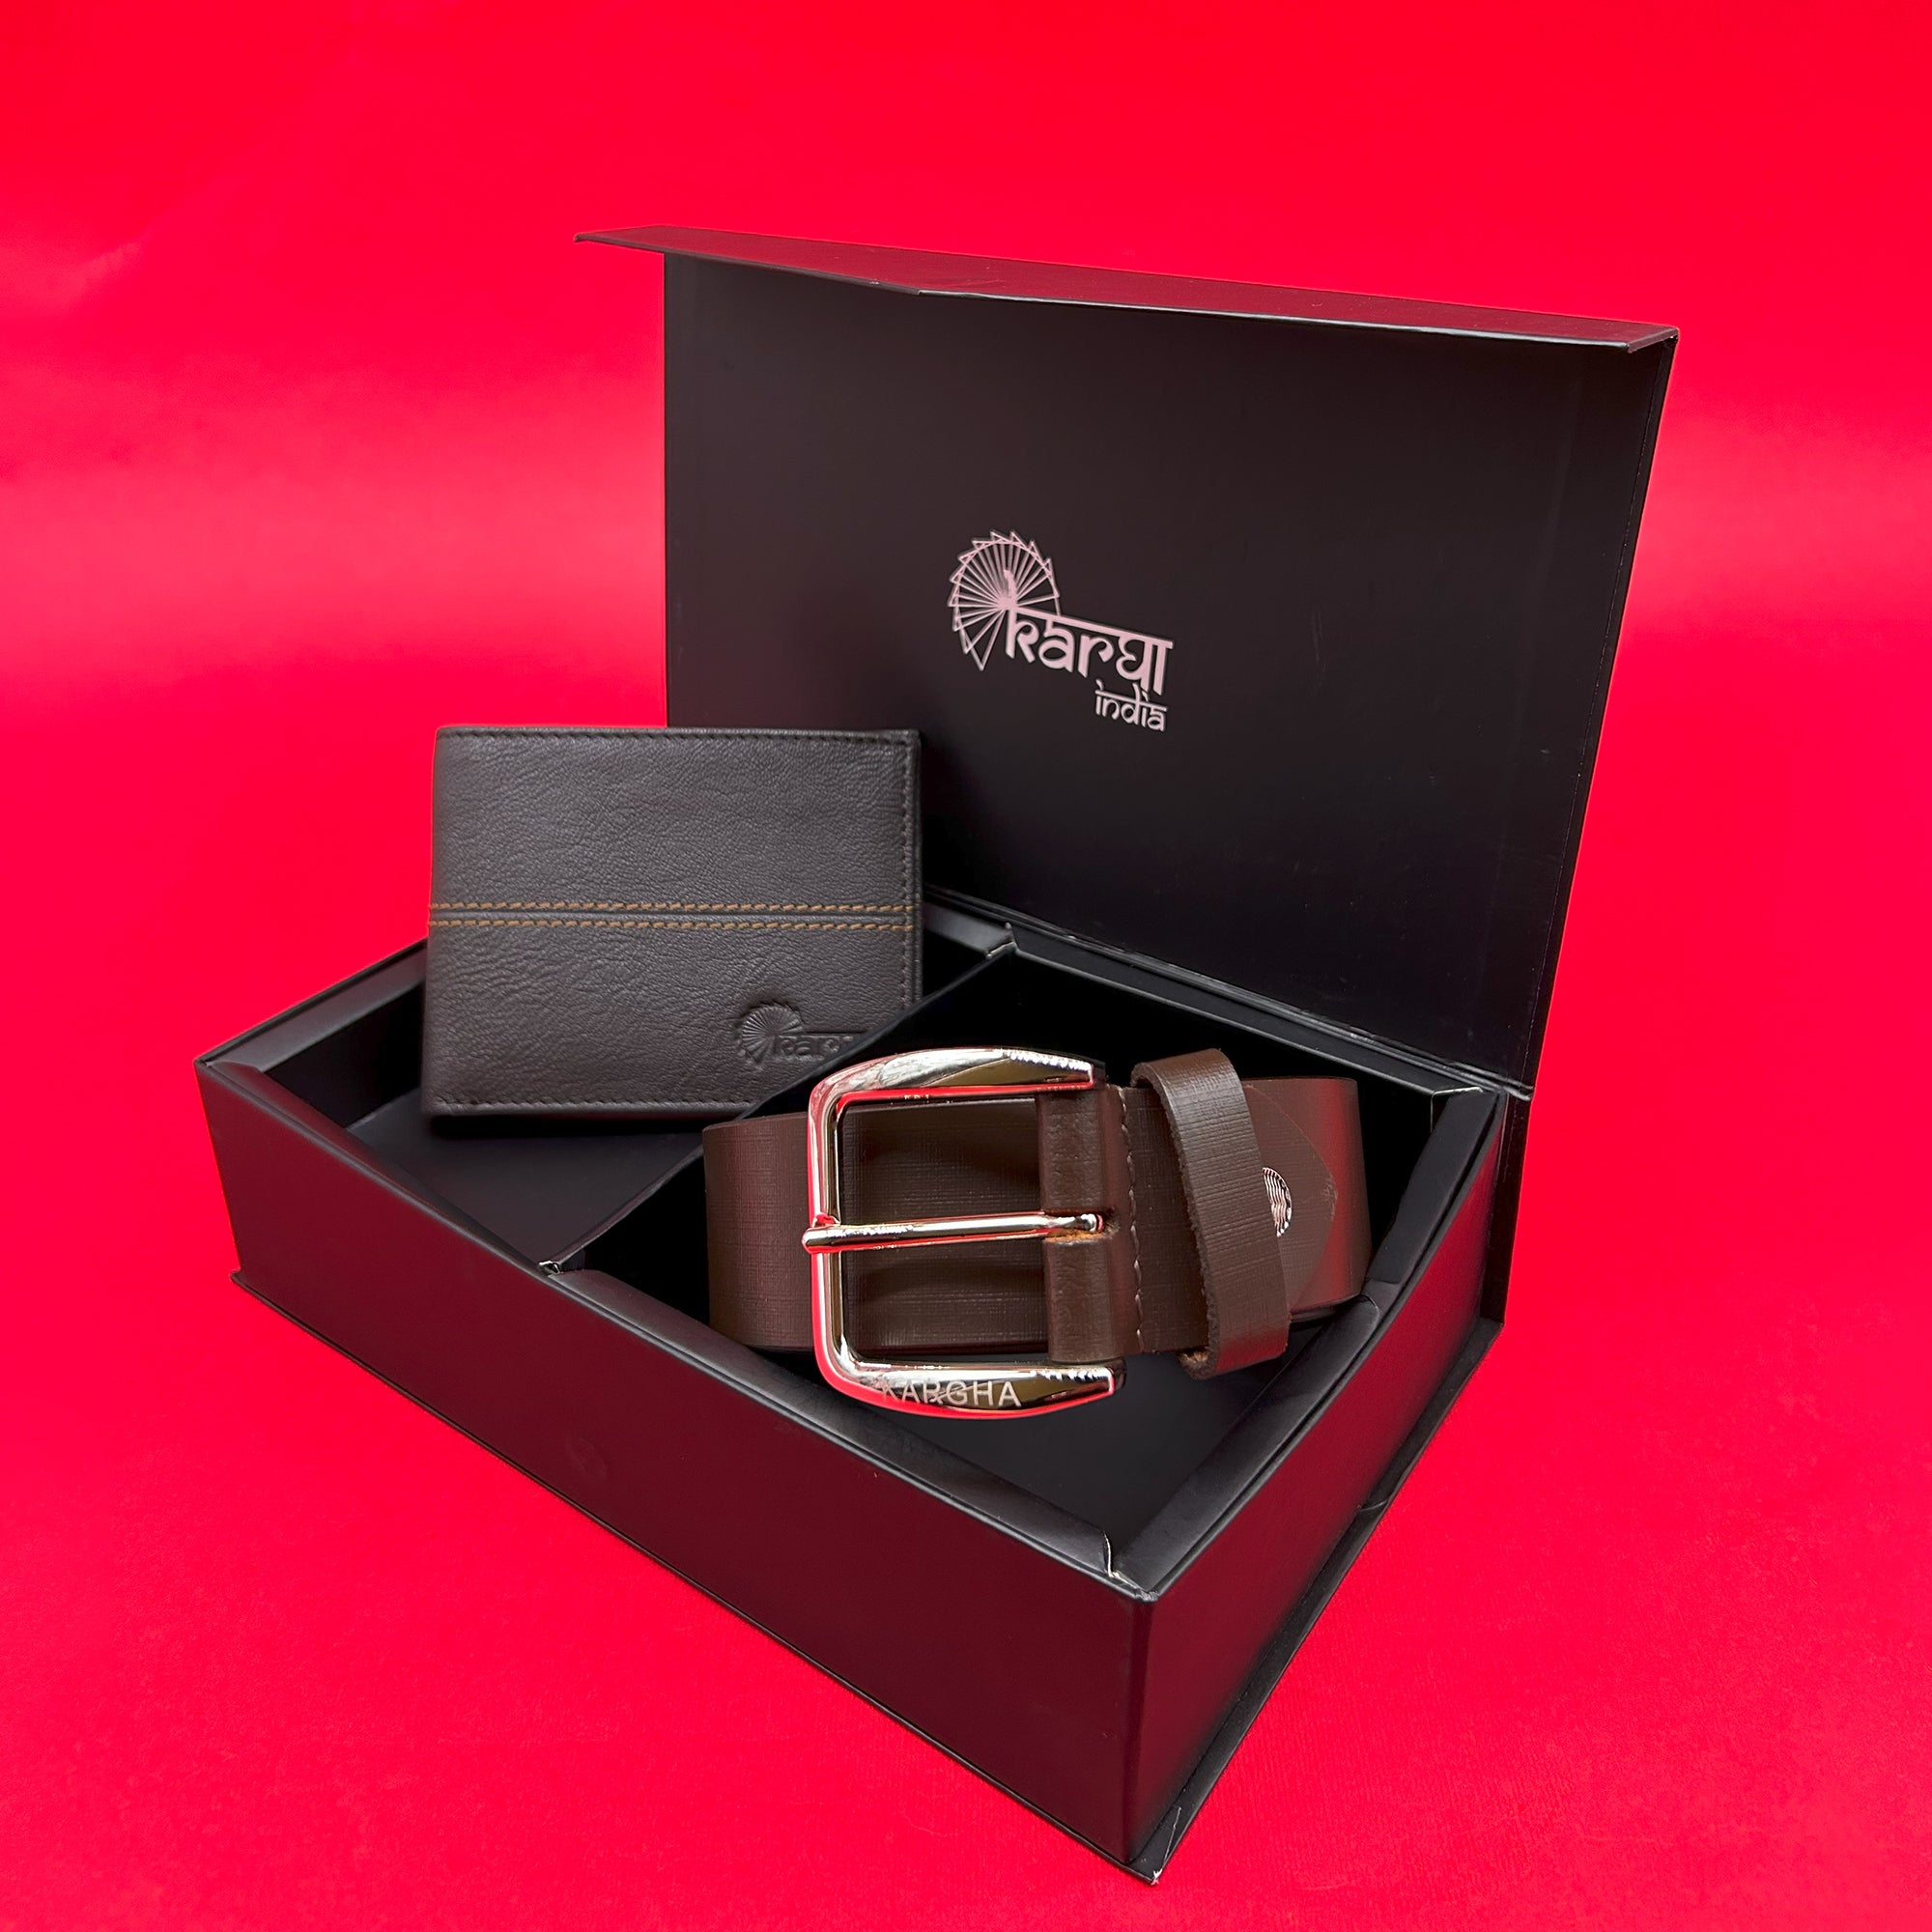 The Cliched Combo - Grace Men's Belt and Bi-Fold Wallet